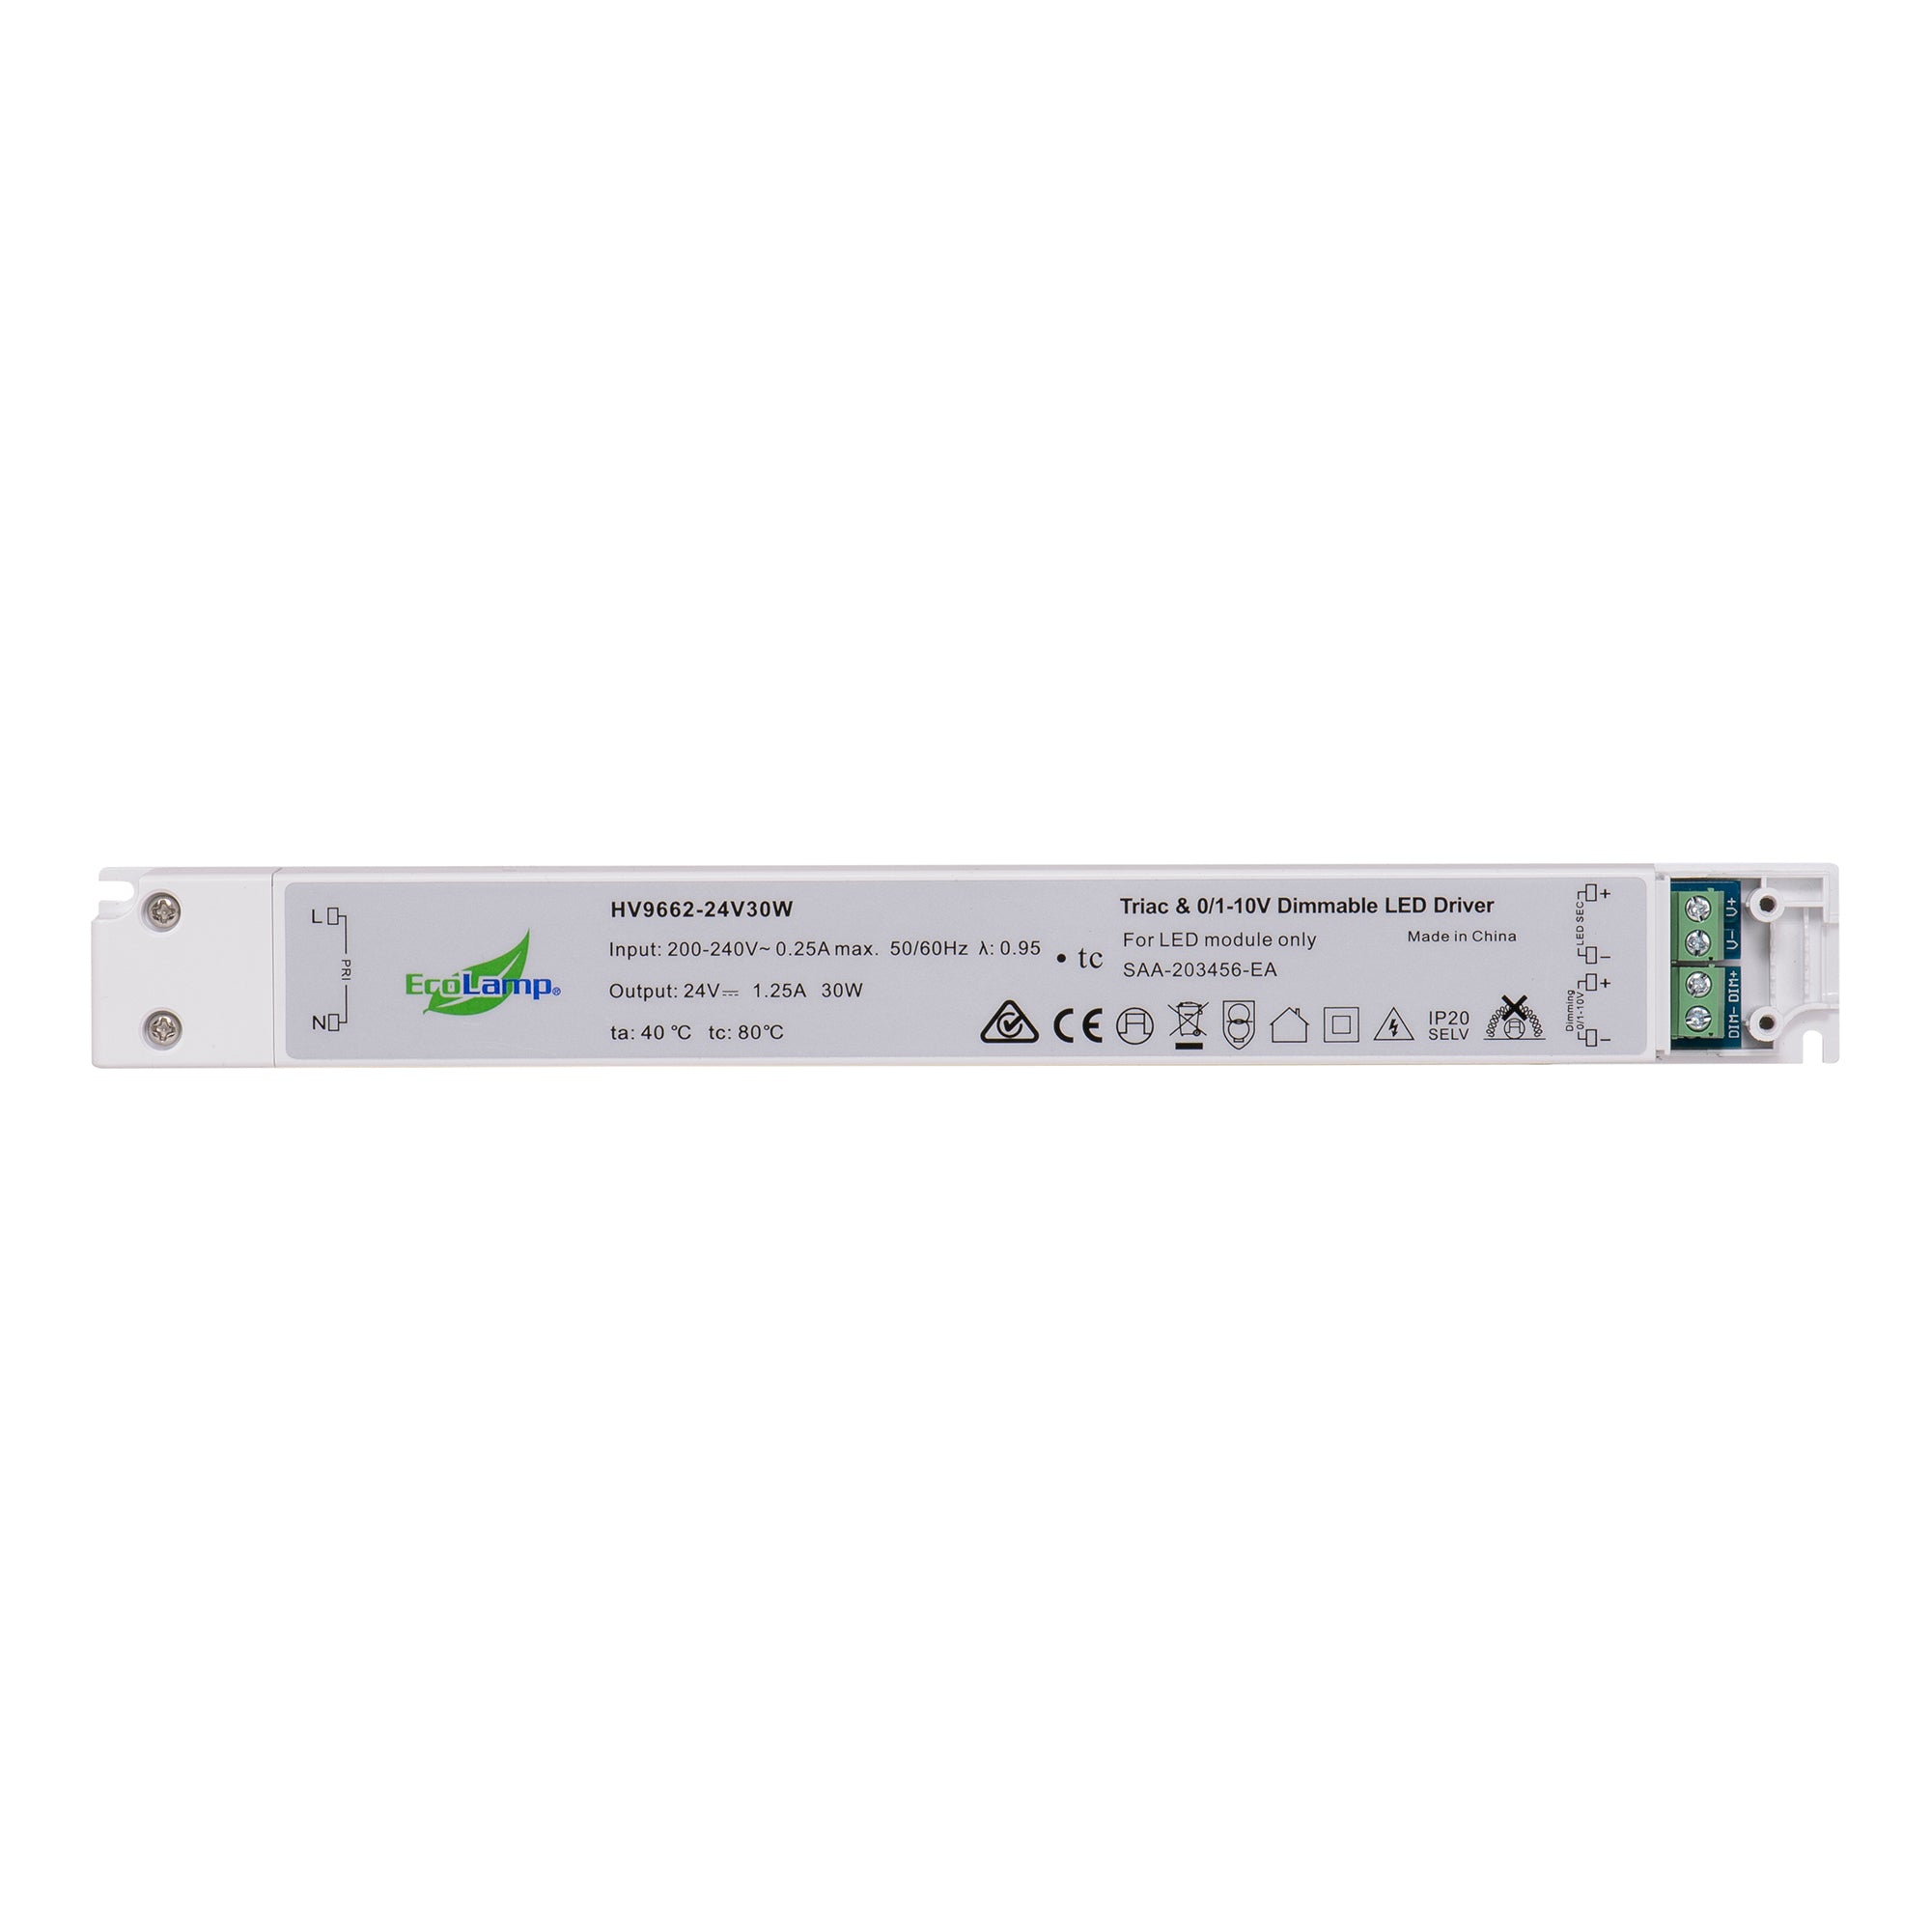 HV9662-30W IP20 Triac + 0-1/10v 2 in 1 Dimmable LED Driver